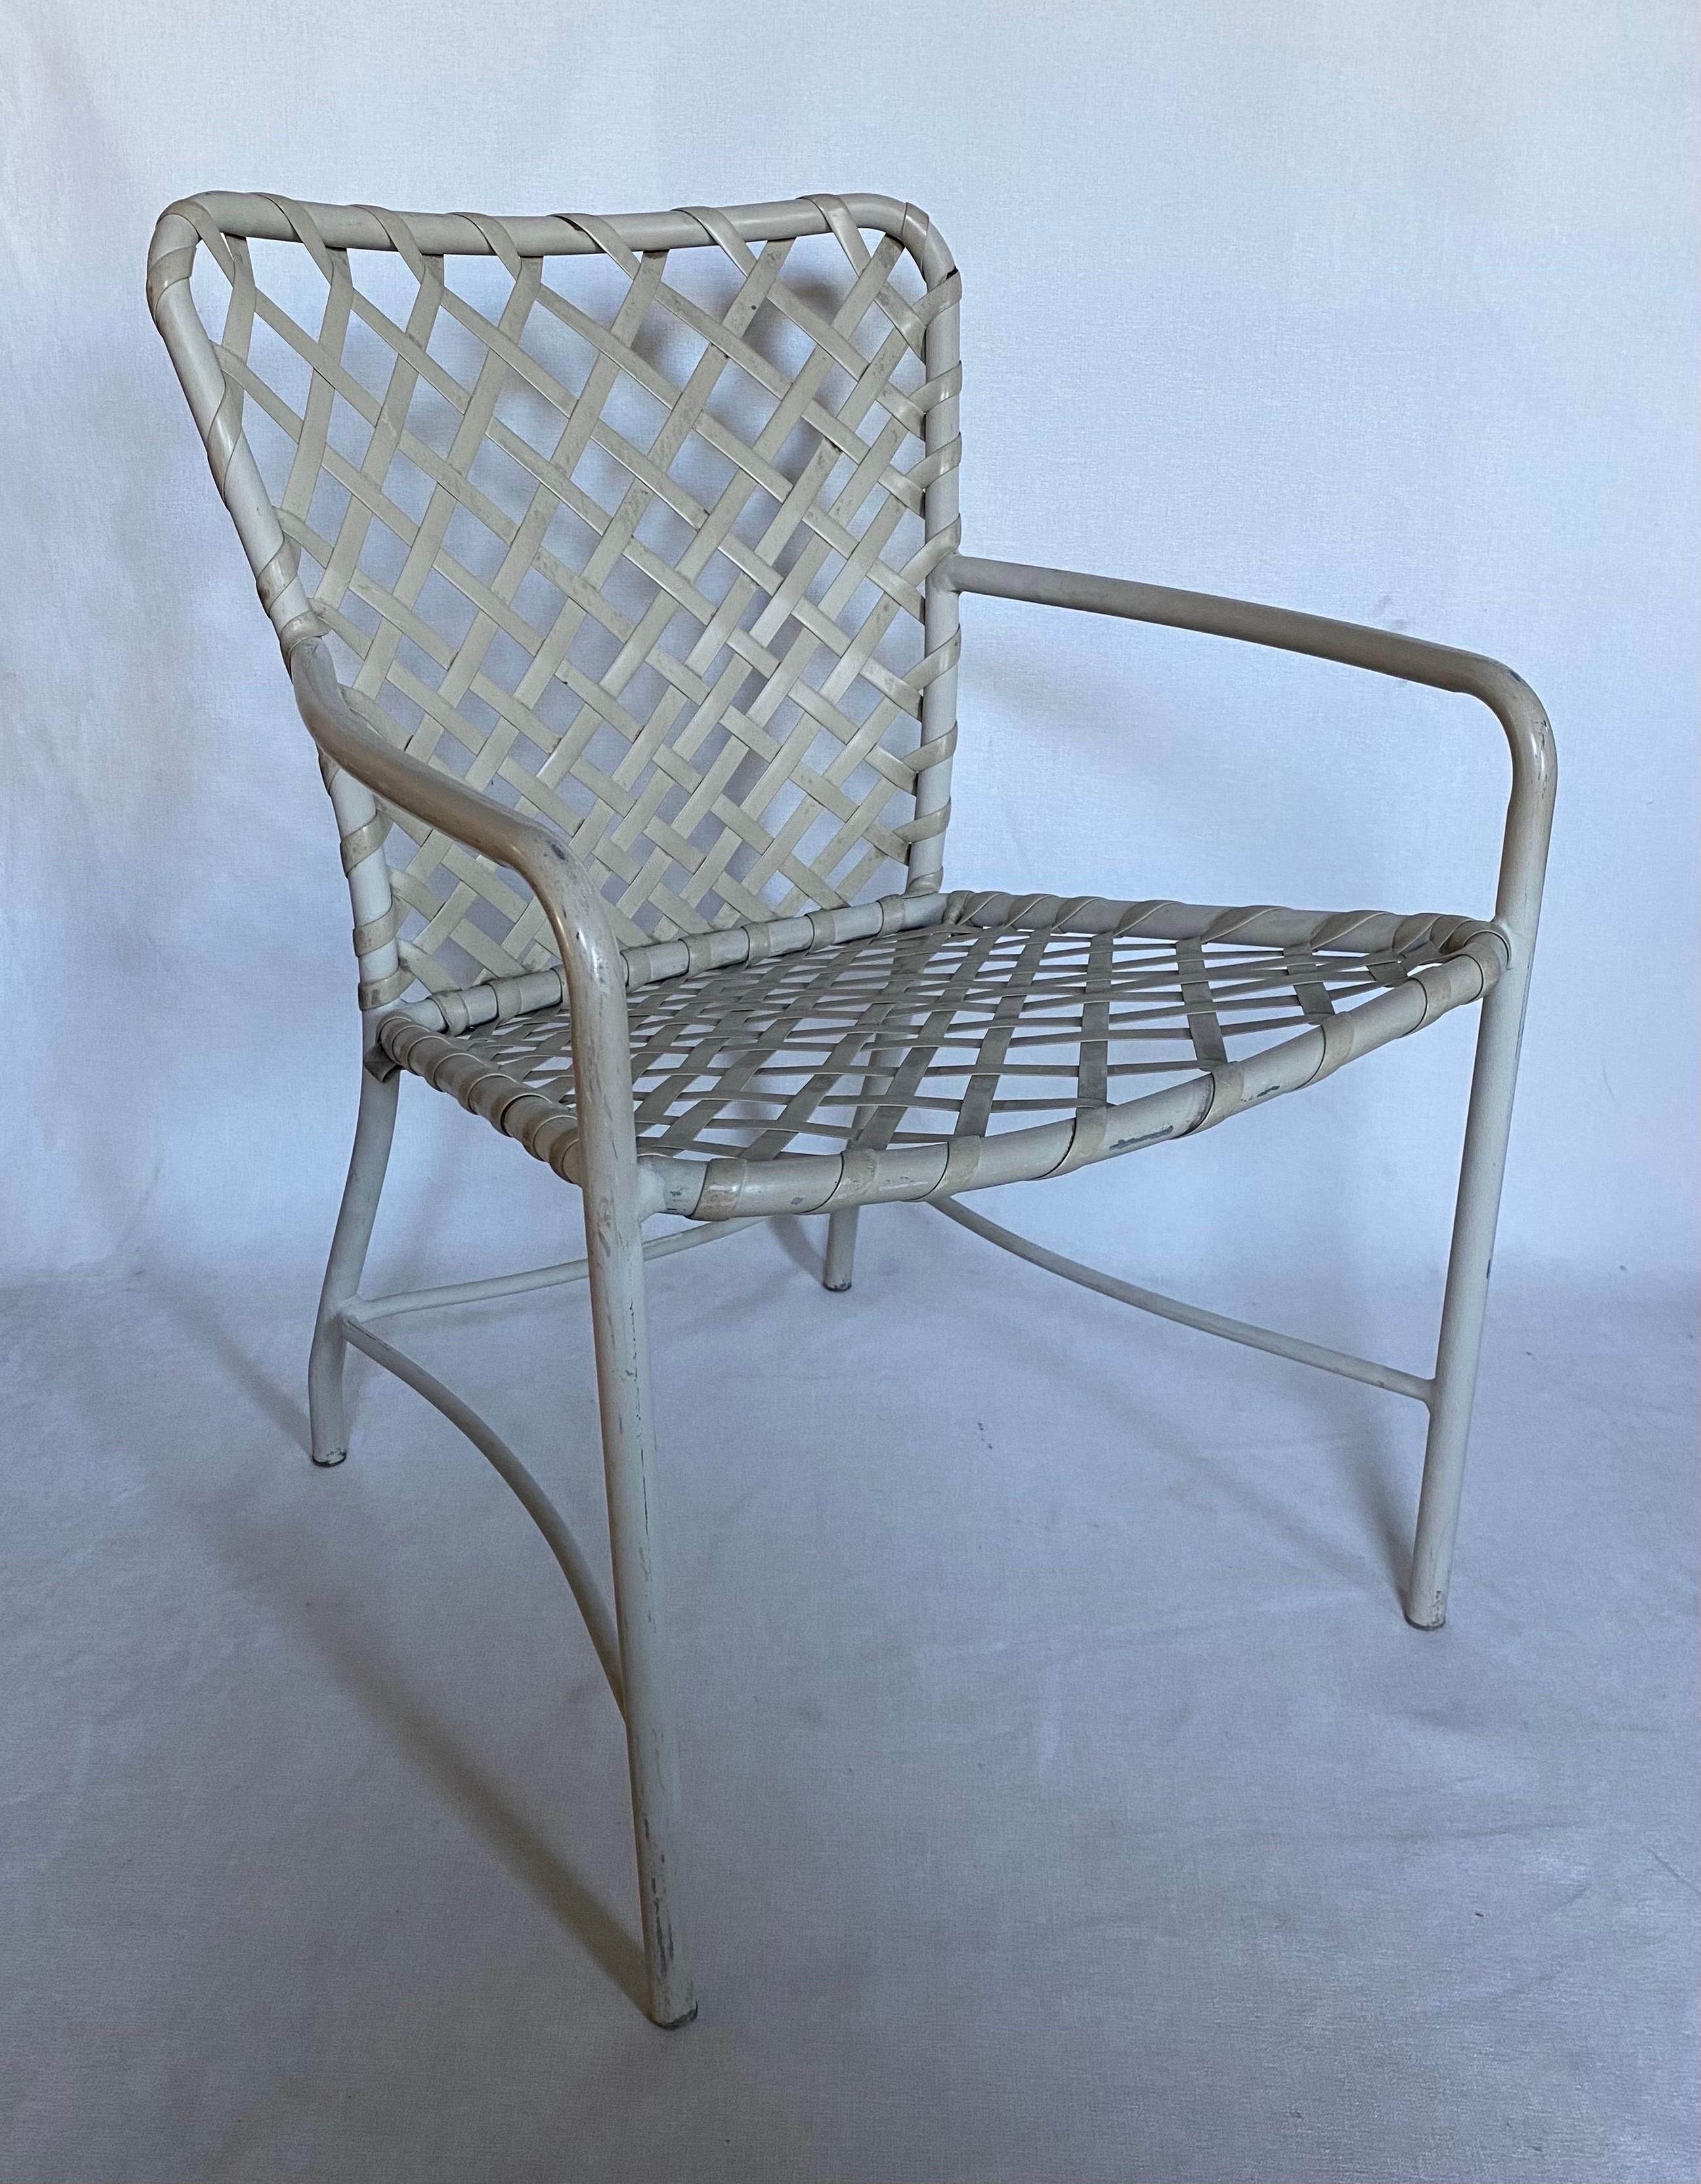 Set of four of Mid-Century Modern outdoor patio dining armchairs by Brown Jordan. White tubular curved aluminum frames feature original white/cream vinyl strapping in a cross-lace pattern. Original Brown Jordan labels and item numbers on all frames.